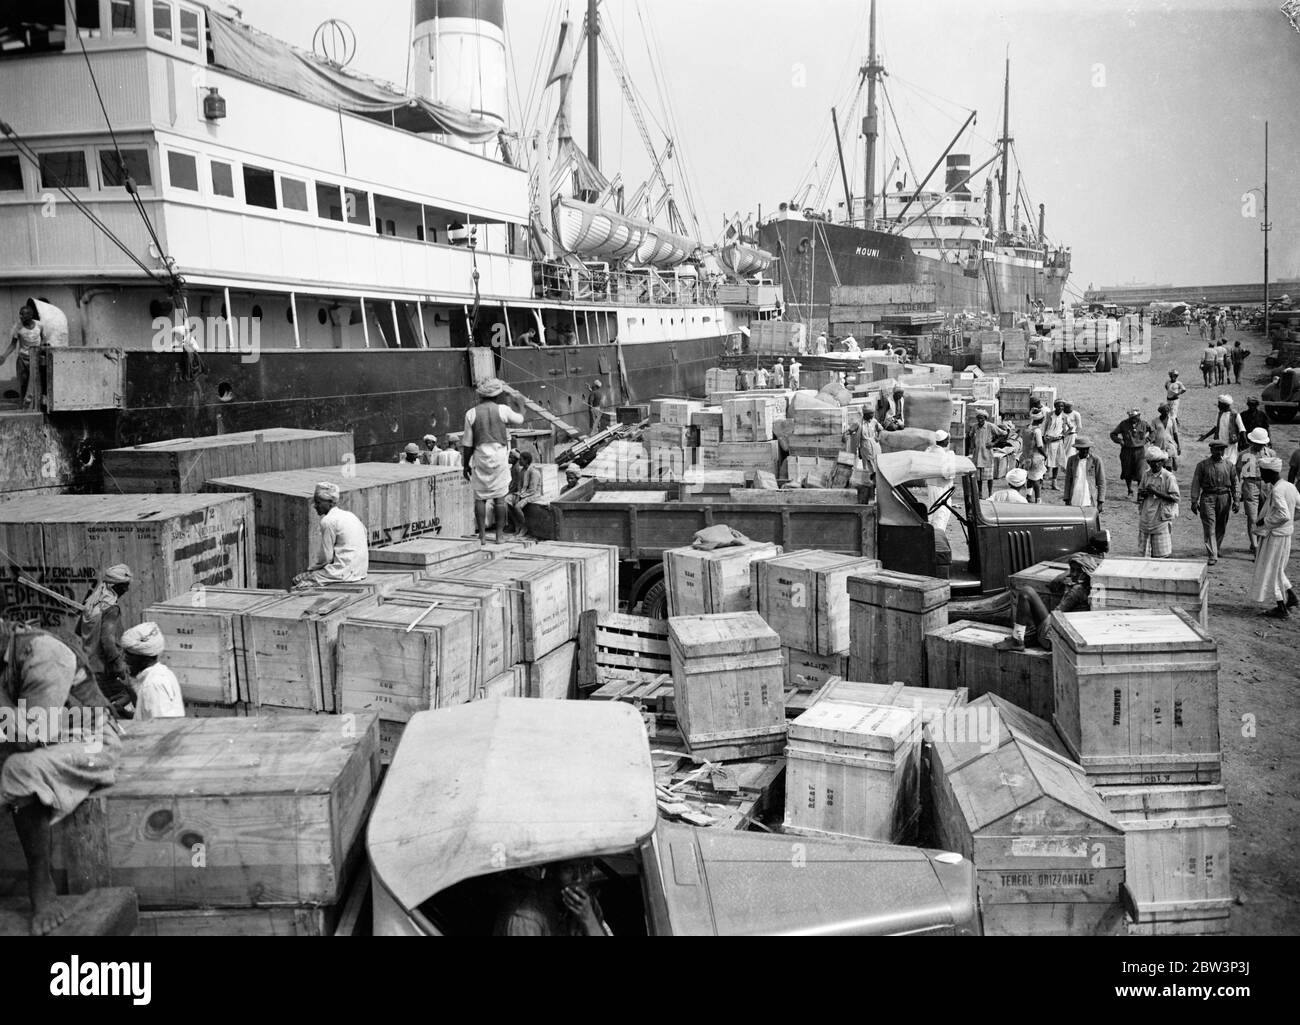 400,000 tons of war supplies arrive every day at Massawa despite sanctions - Italy saves up for rainy season . The docks at Massawa piled high with all kinds of war supplies . 7 December 1935 Stock Photo